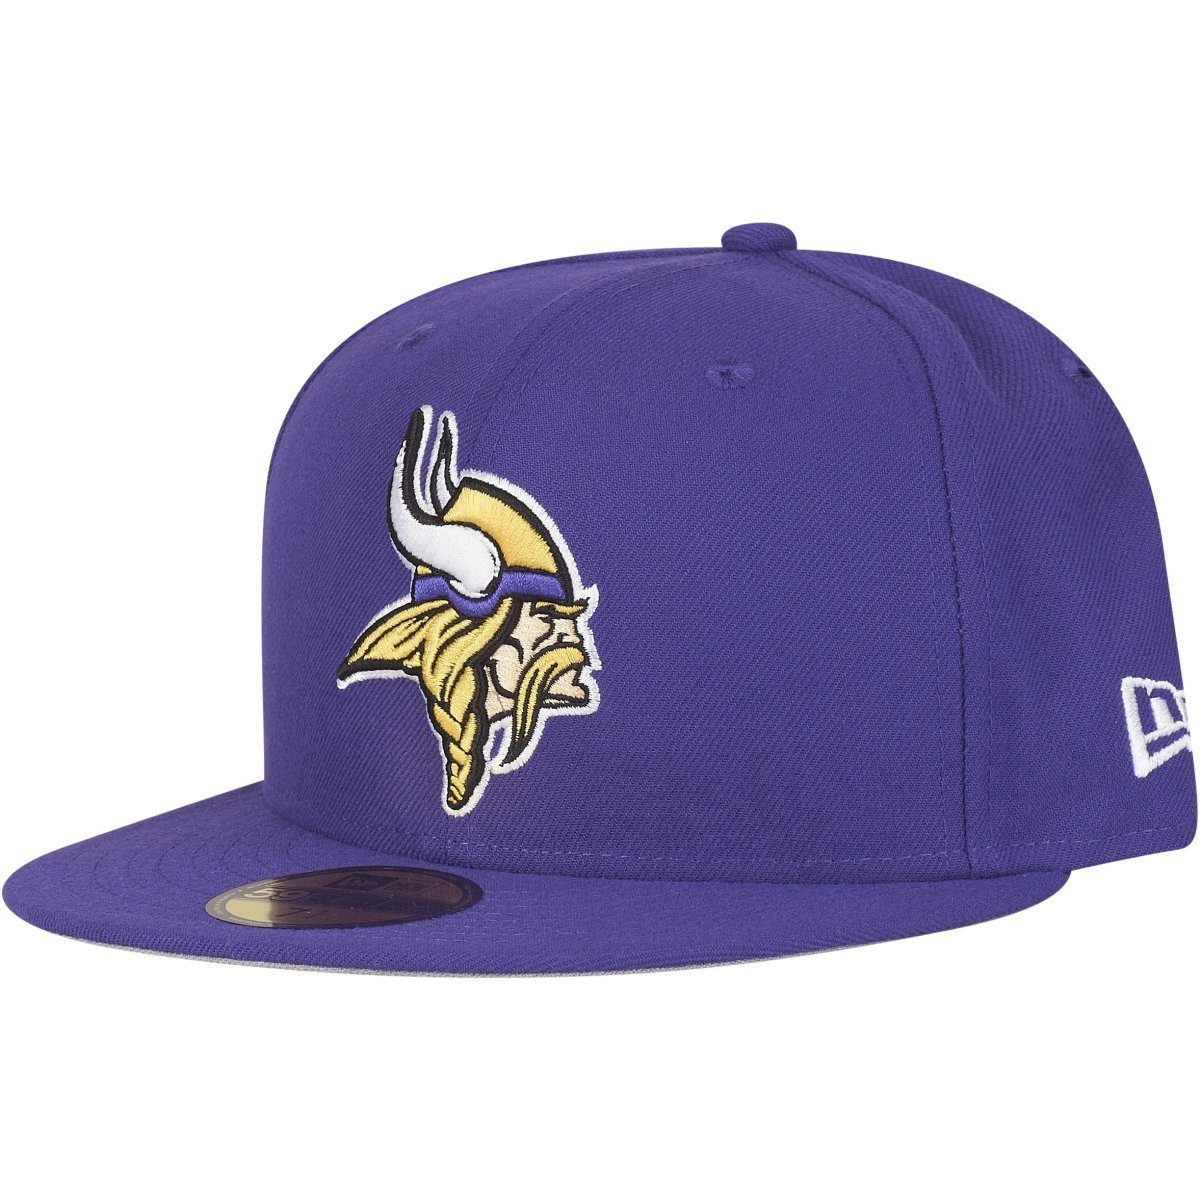 New Era Fitted Cap 59Fifty NFL ON FIELD Minnesota Vikings | Fitted Caps